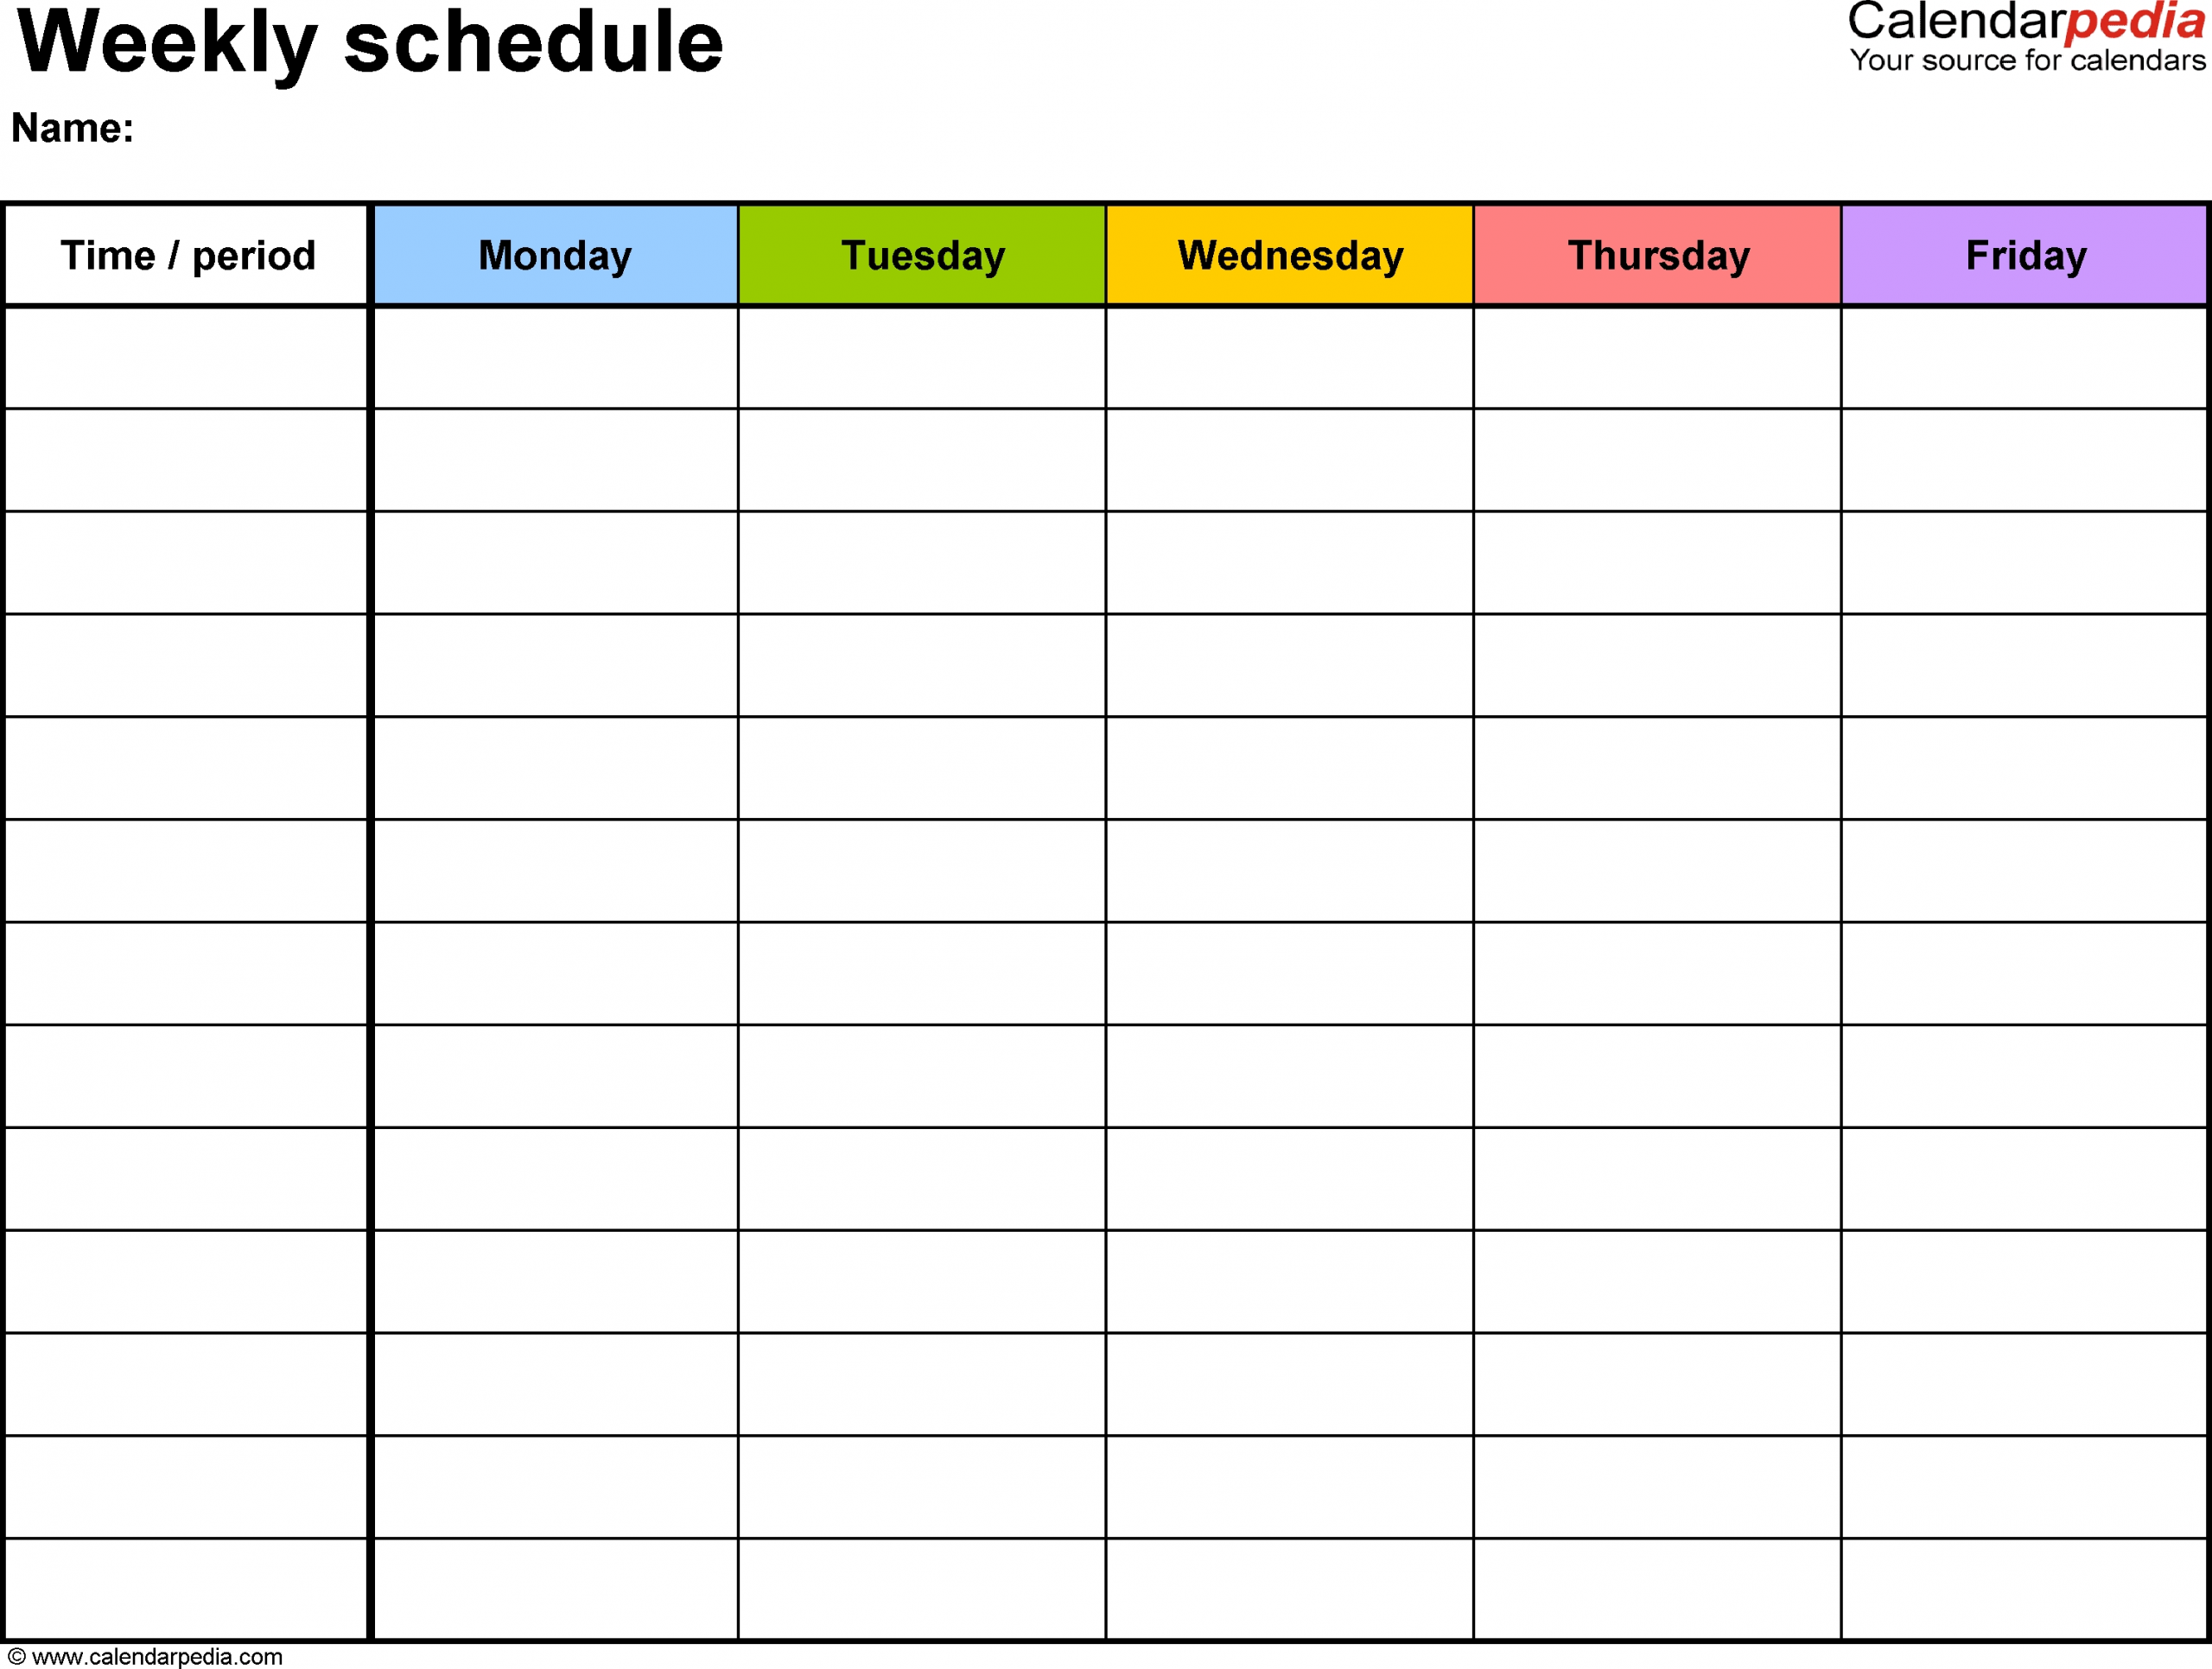 Free Weekly Schedule Templates For Word - 18 Templates pertaining to Monday To Friday Weekly Planner